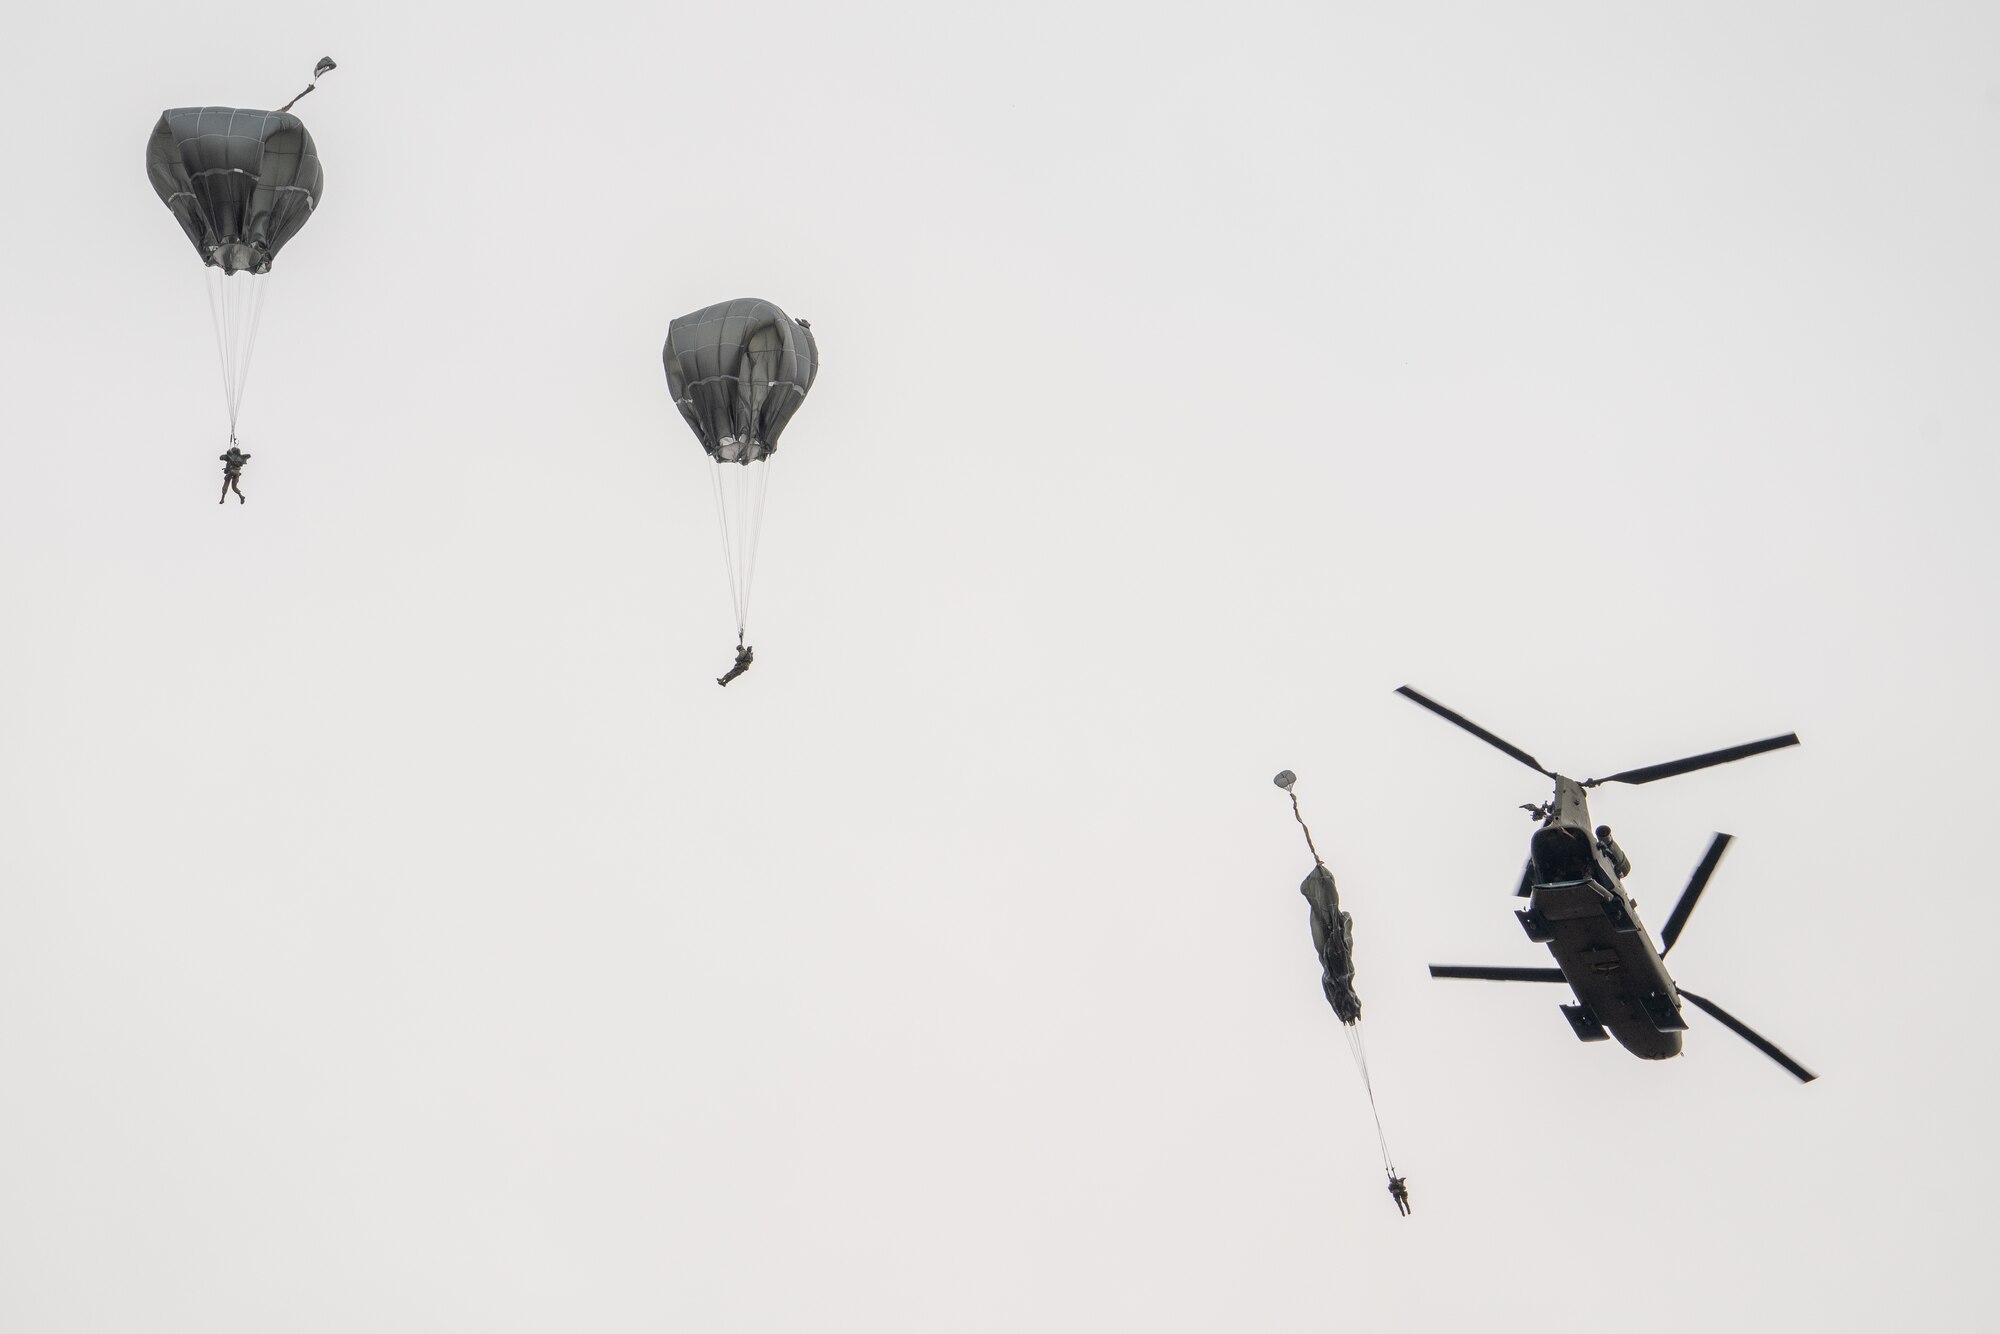 U.S. Army paratroopers assigned to the 4th Infantry Brigade Combat Team (Airborne), 25th Infantry Division, U.S. Army Alaska, jump from a CH-47 Chinook.